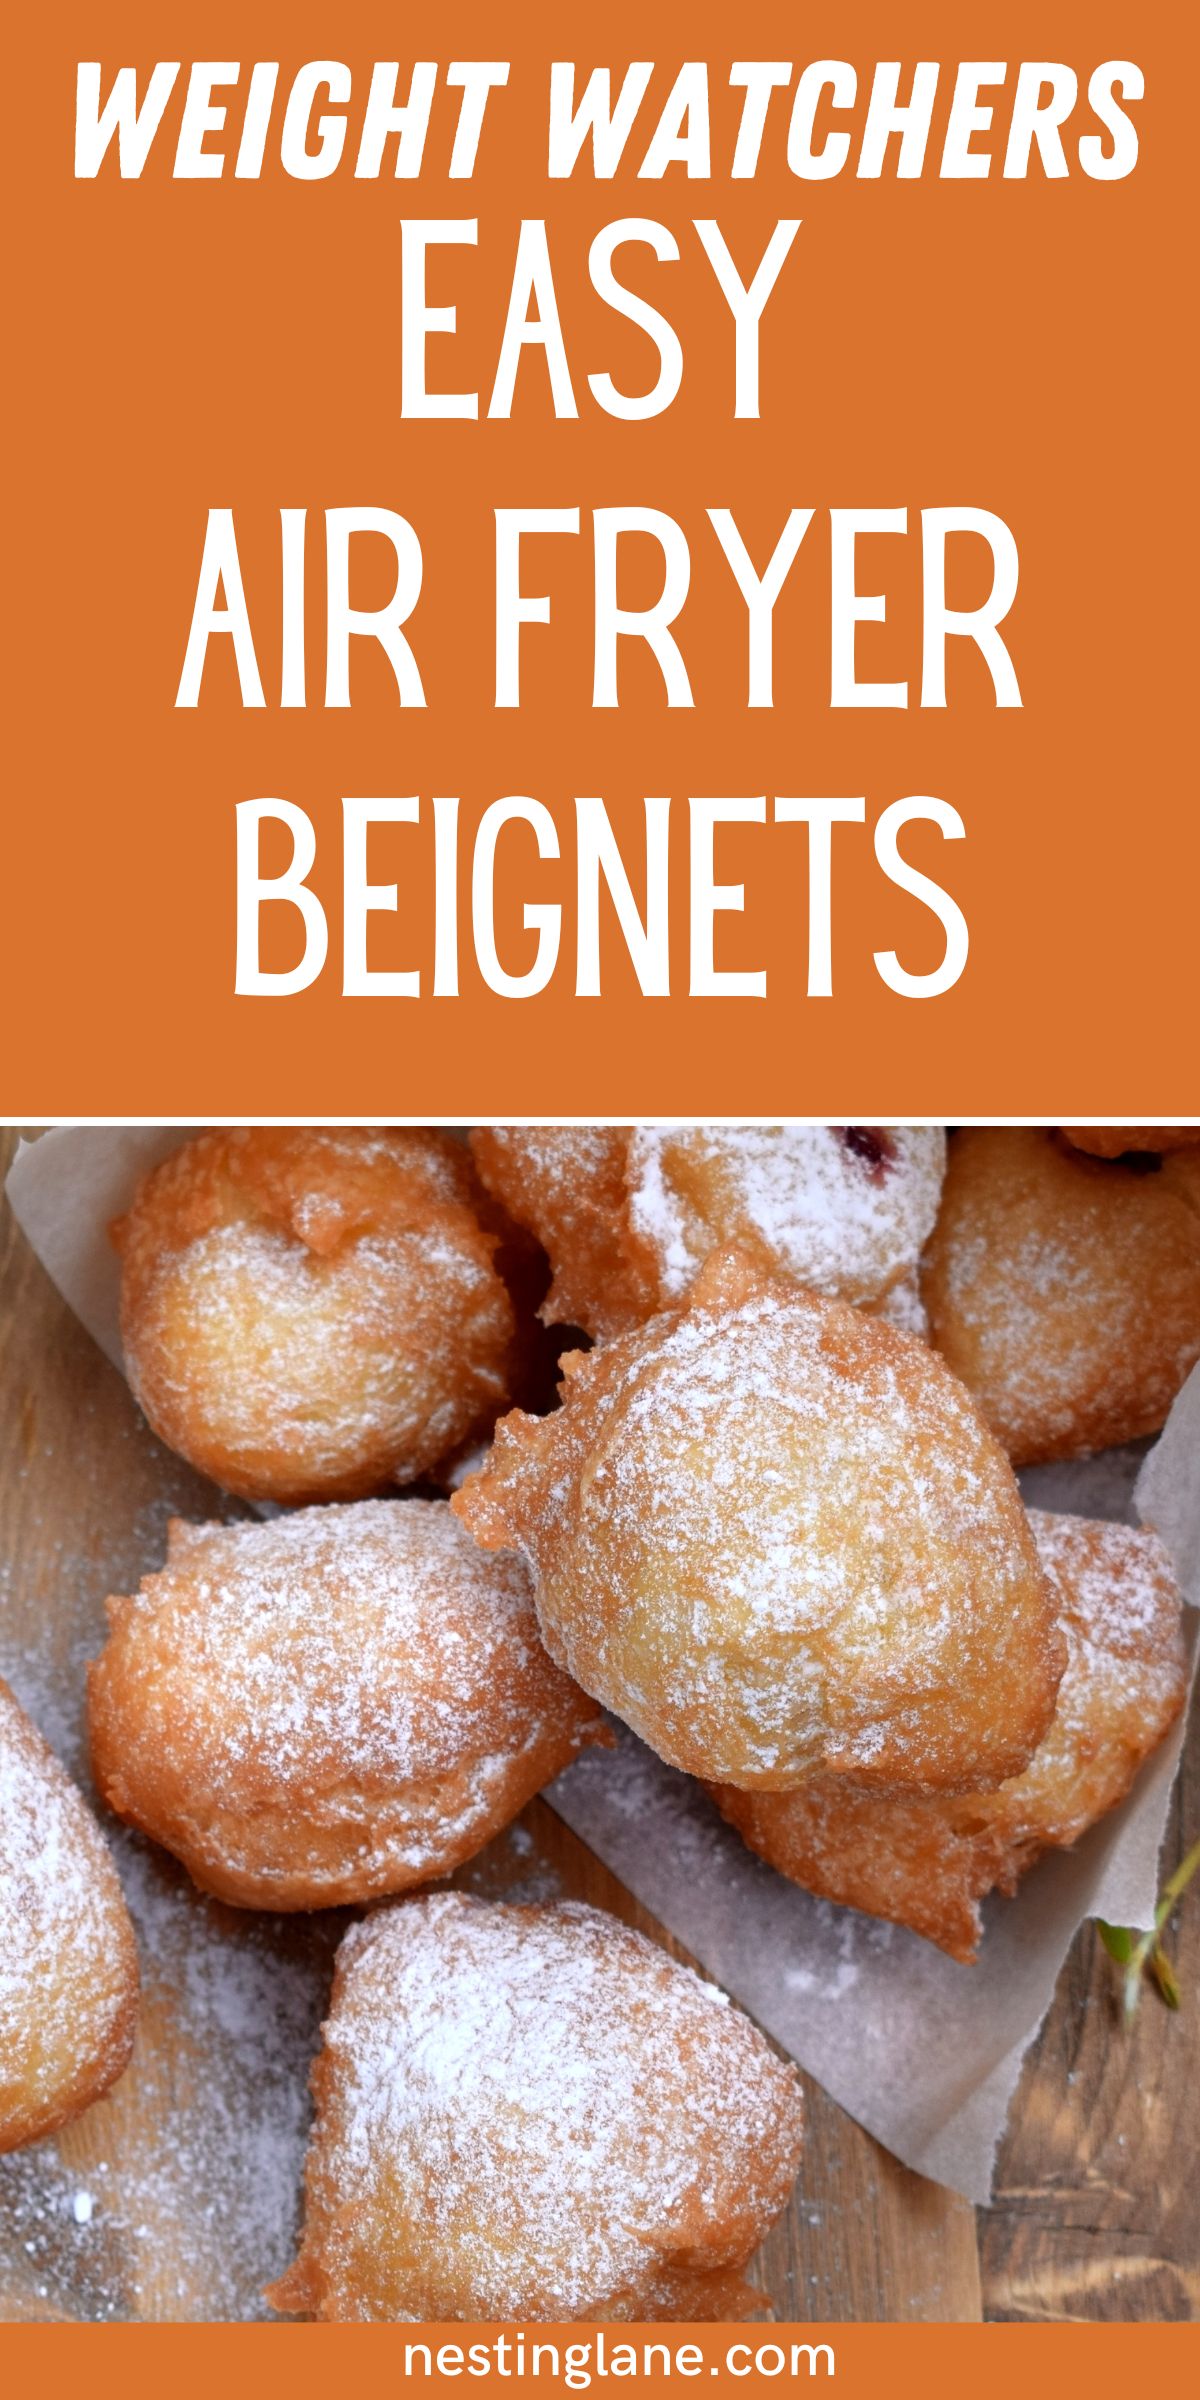 This is a promotional image for Weight Watchers Easy Air Fryer Beignets. The top half of the image features bold white text on an orange background that reads 'WEIGHT WATCHERS EASY AIR FRYER BEIGNETS'. Below the text, a delicious close-up photo shows the golden, sugar-dusted beignets in a paper-lined tray. The website 'nestinglane.com' is referenced at the bottom.